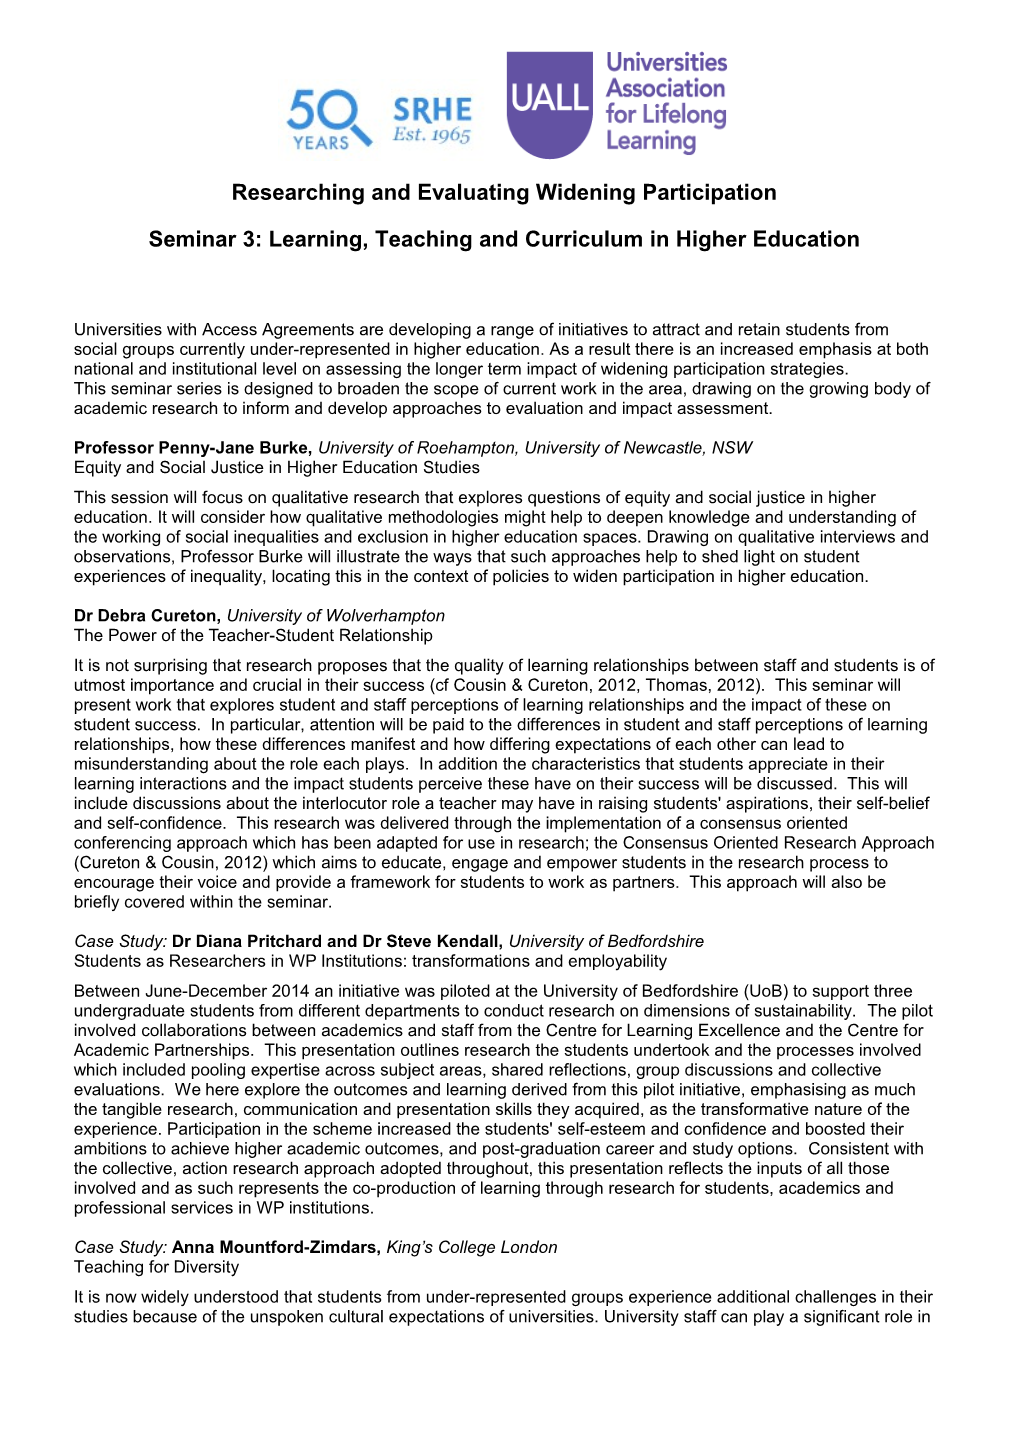 Researching and Evaluating Widening Participation - Learning, Teaching and Curriculum